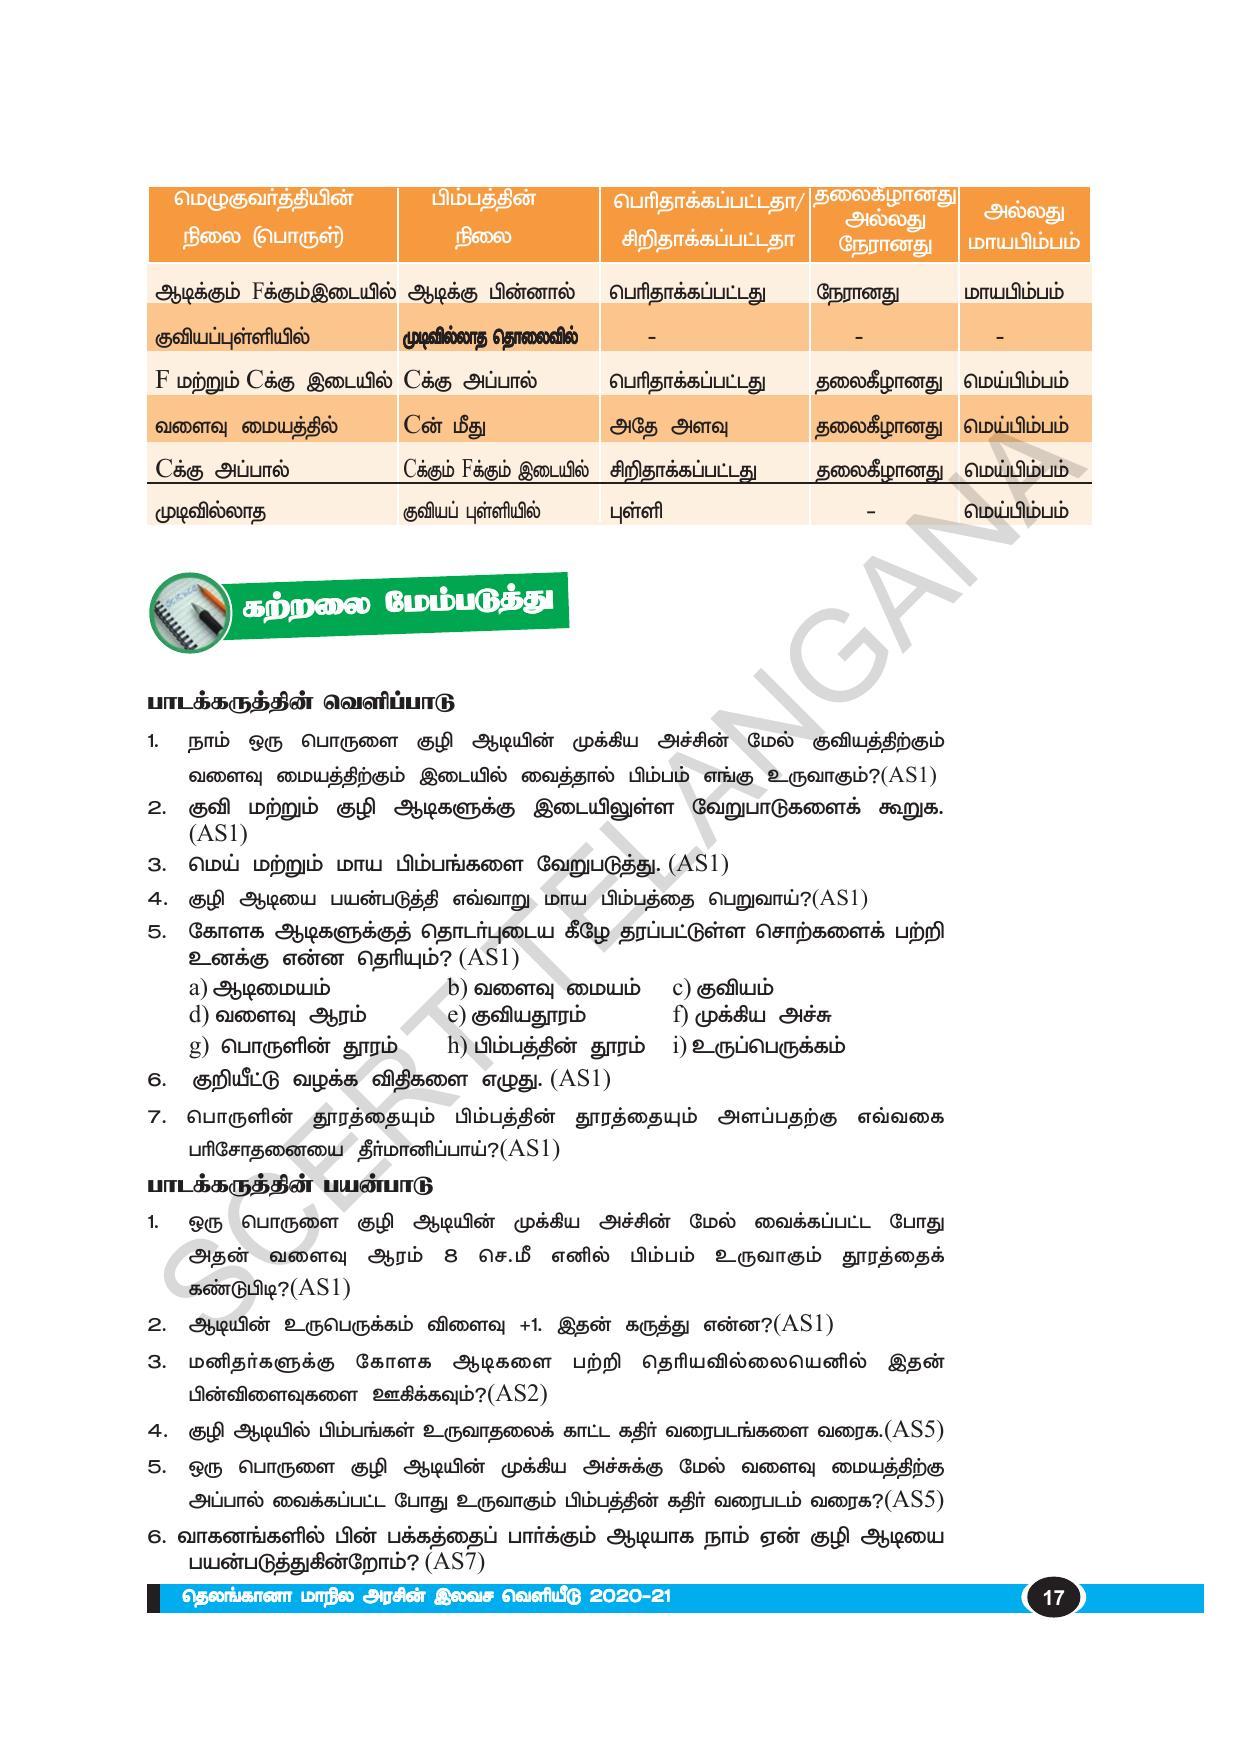 TS SCERT Class 10 Physical Science(Tamil Medium) Text Book - Page 29